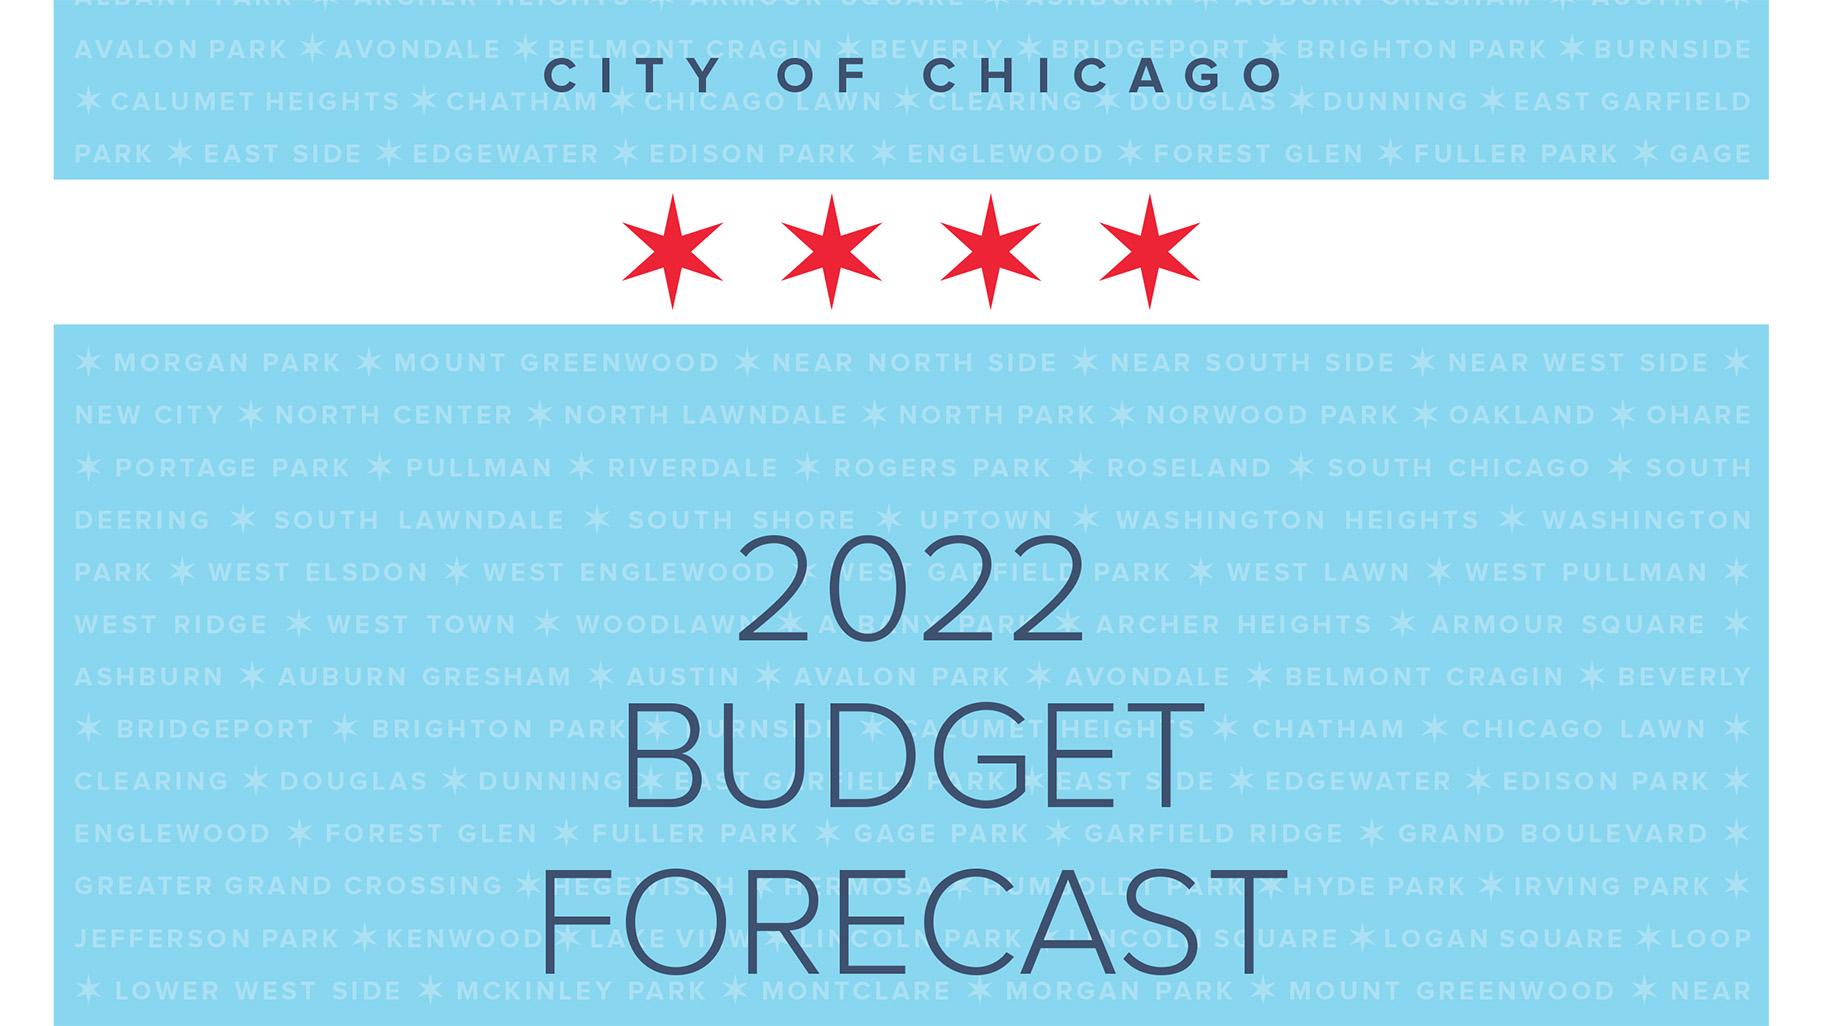 Document: Read the budget forecast.